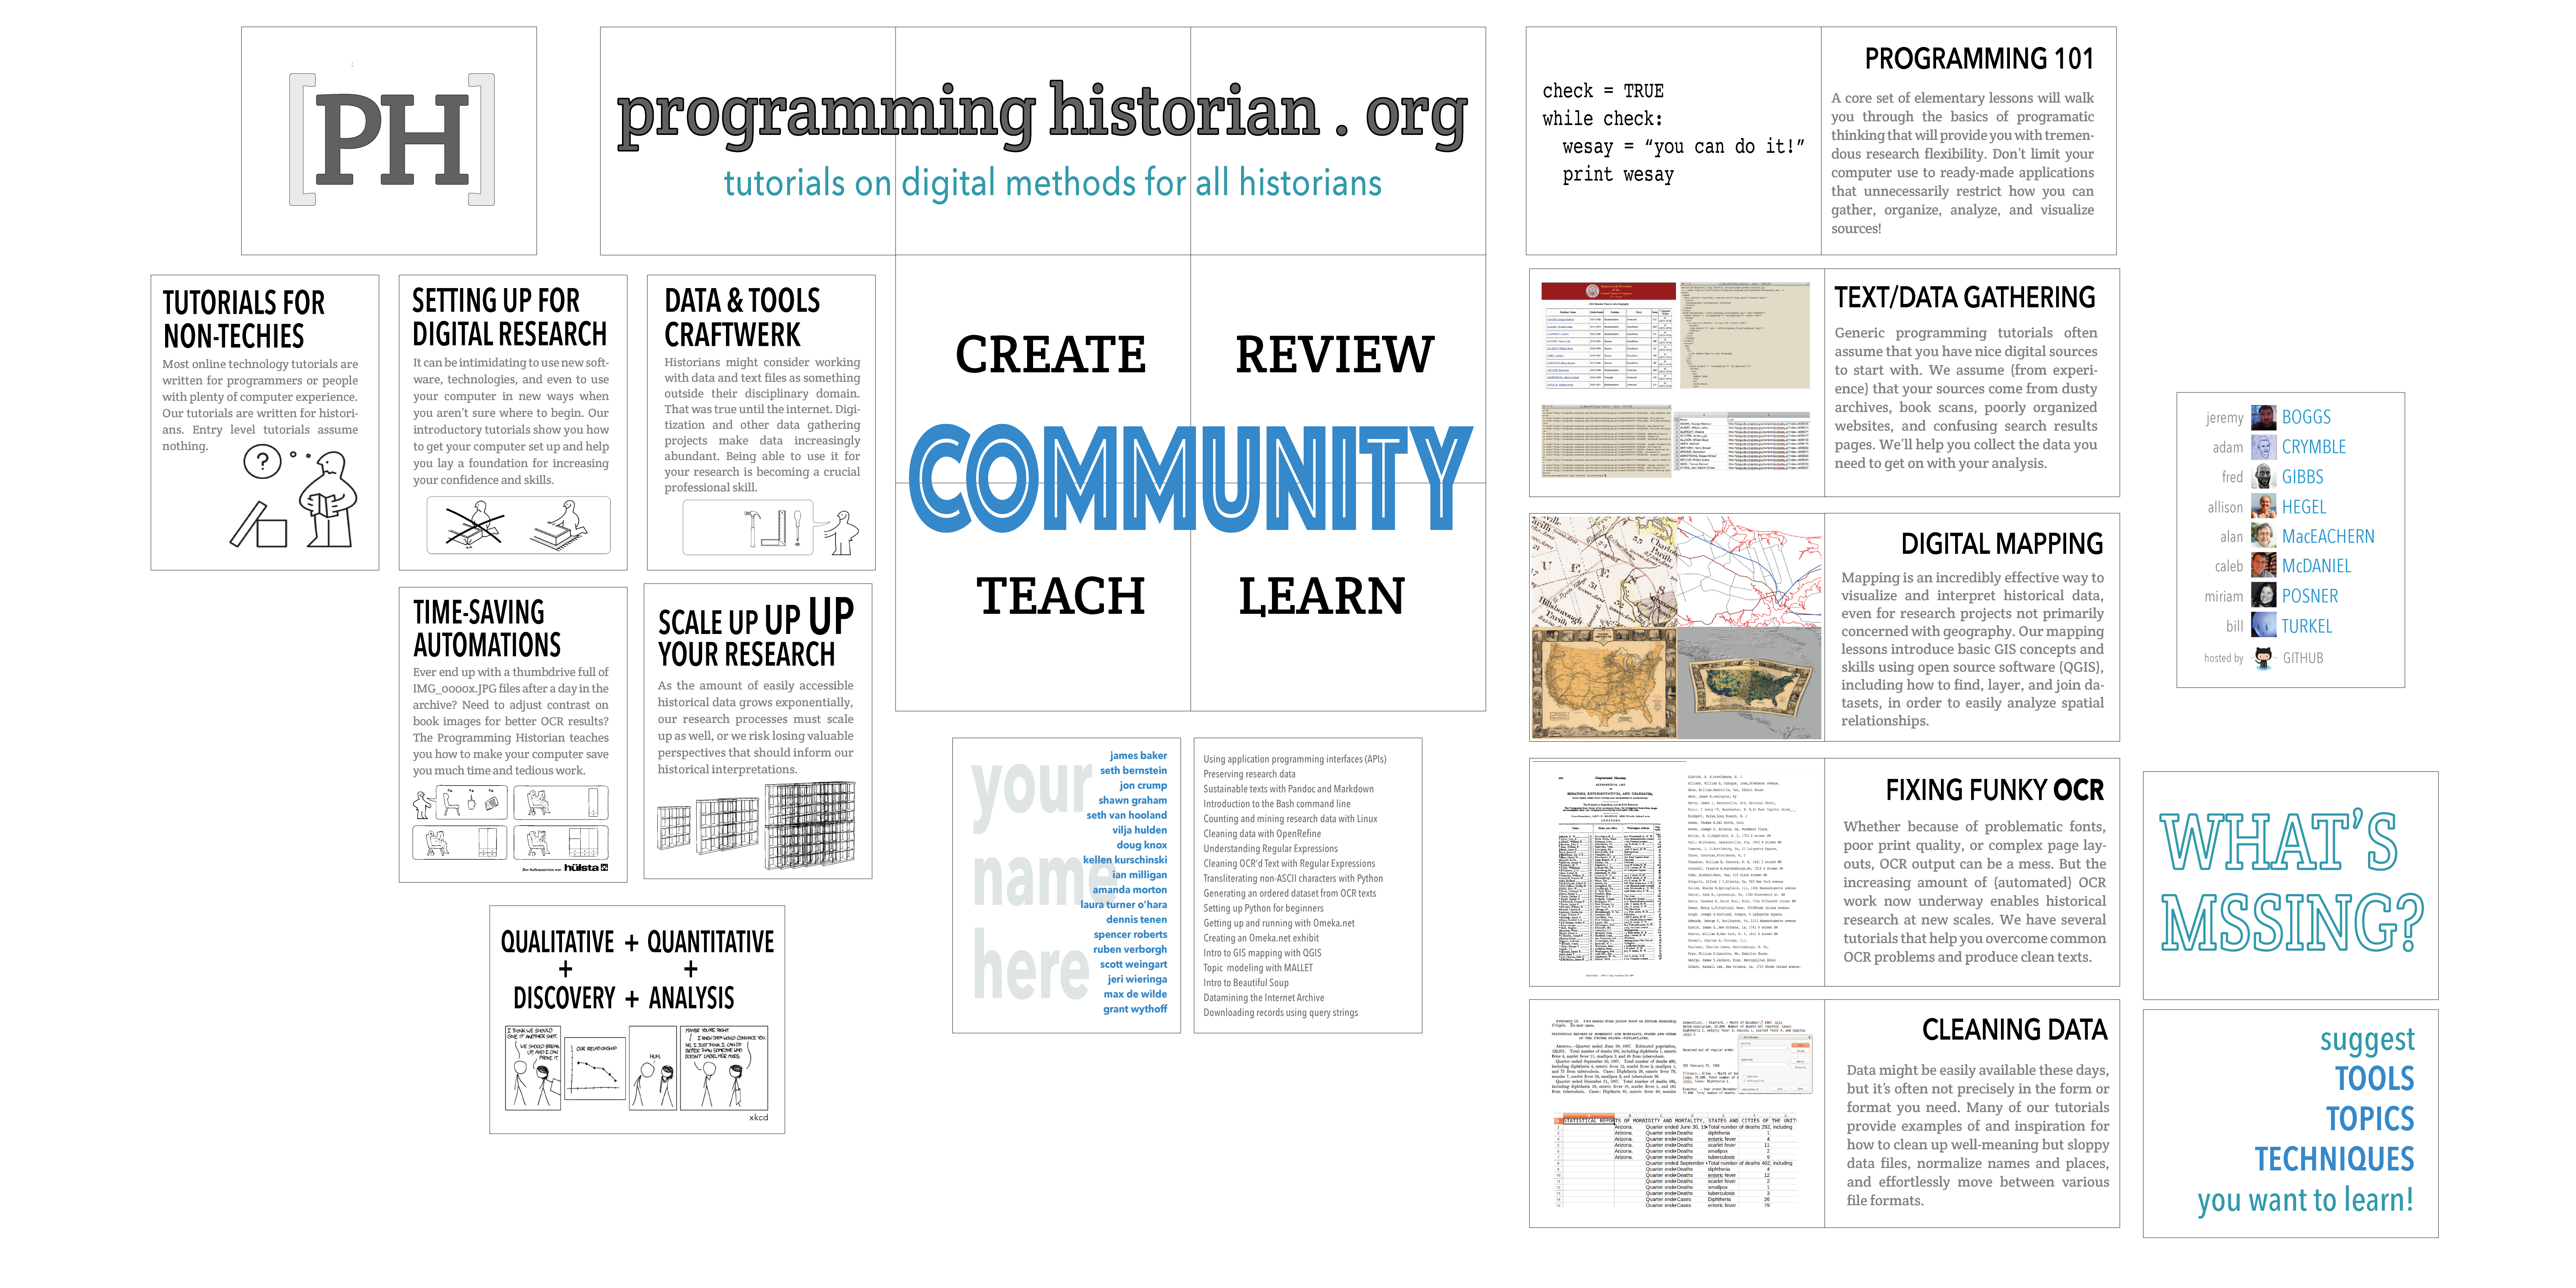 A new perspective on the Programming Historian